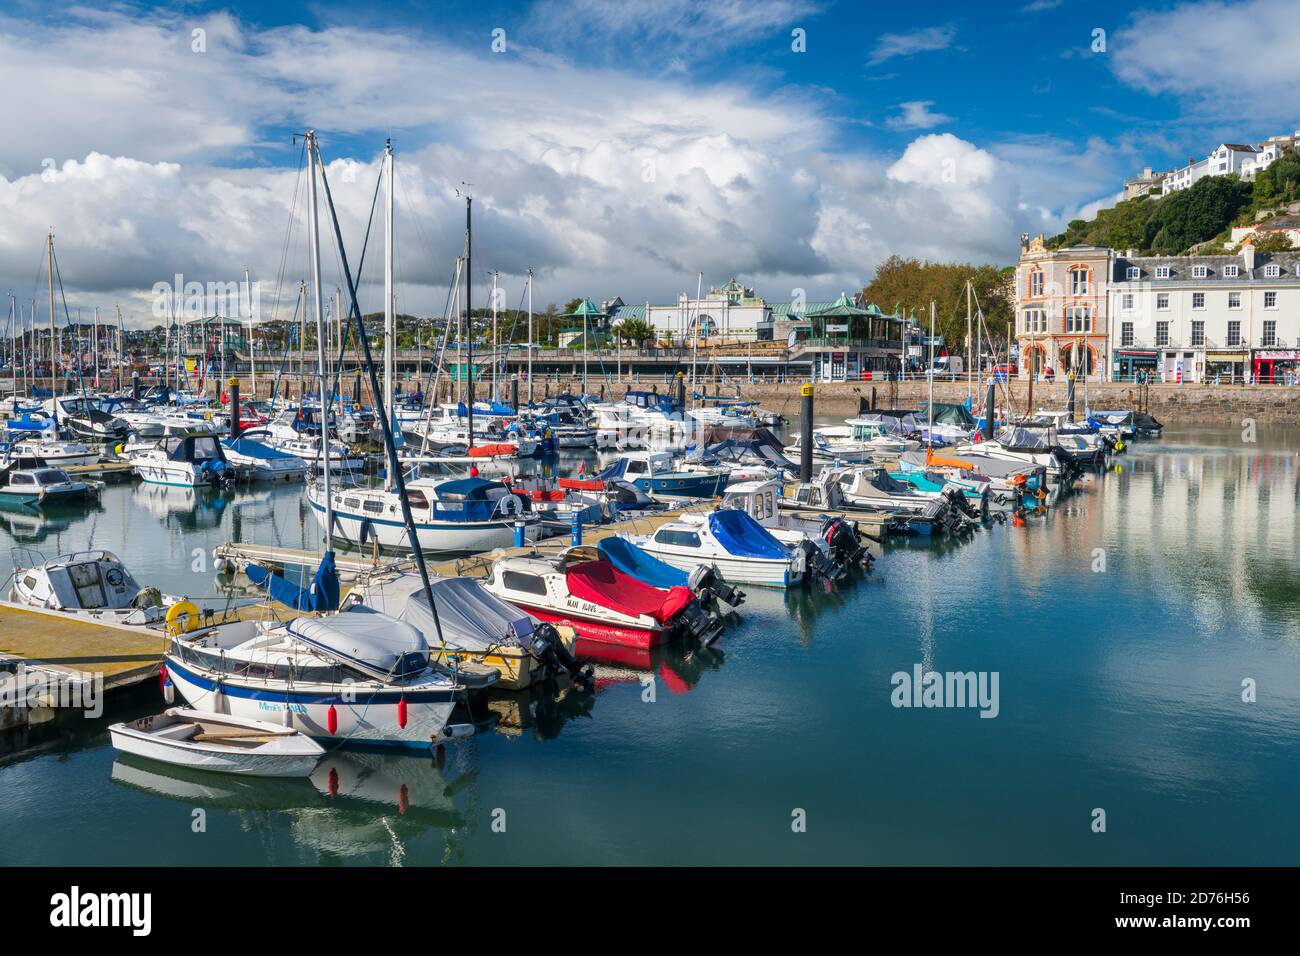 Rows of pleasure craft line the moorings in the marina at Torquay on the 'English Riviera' in South Devon, England. Stock Photo